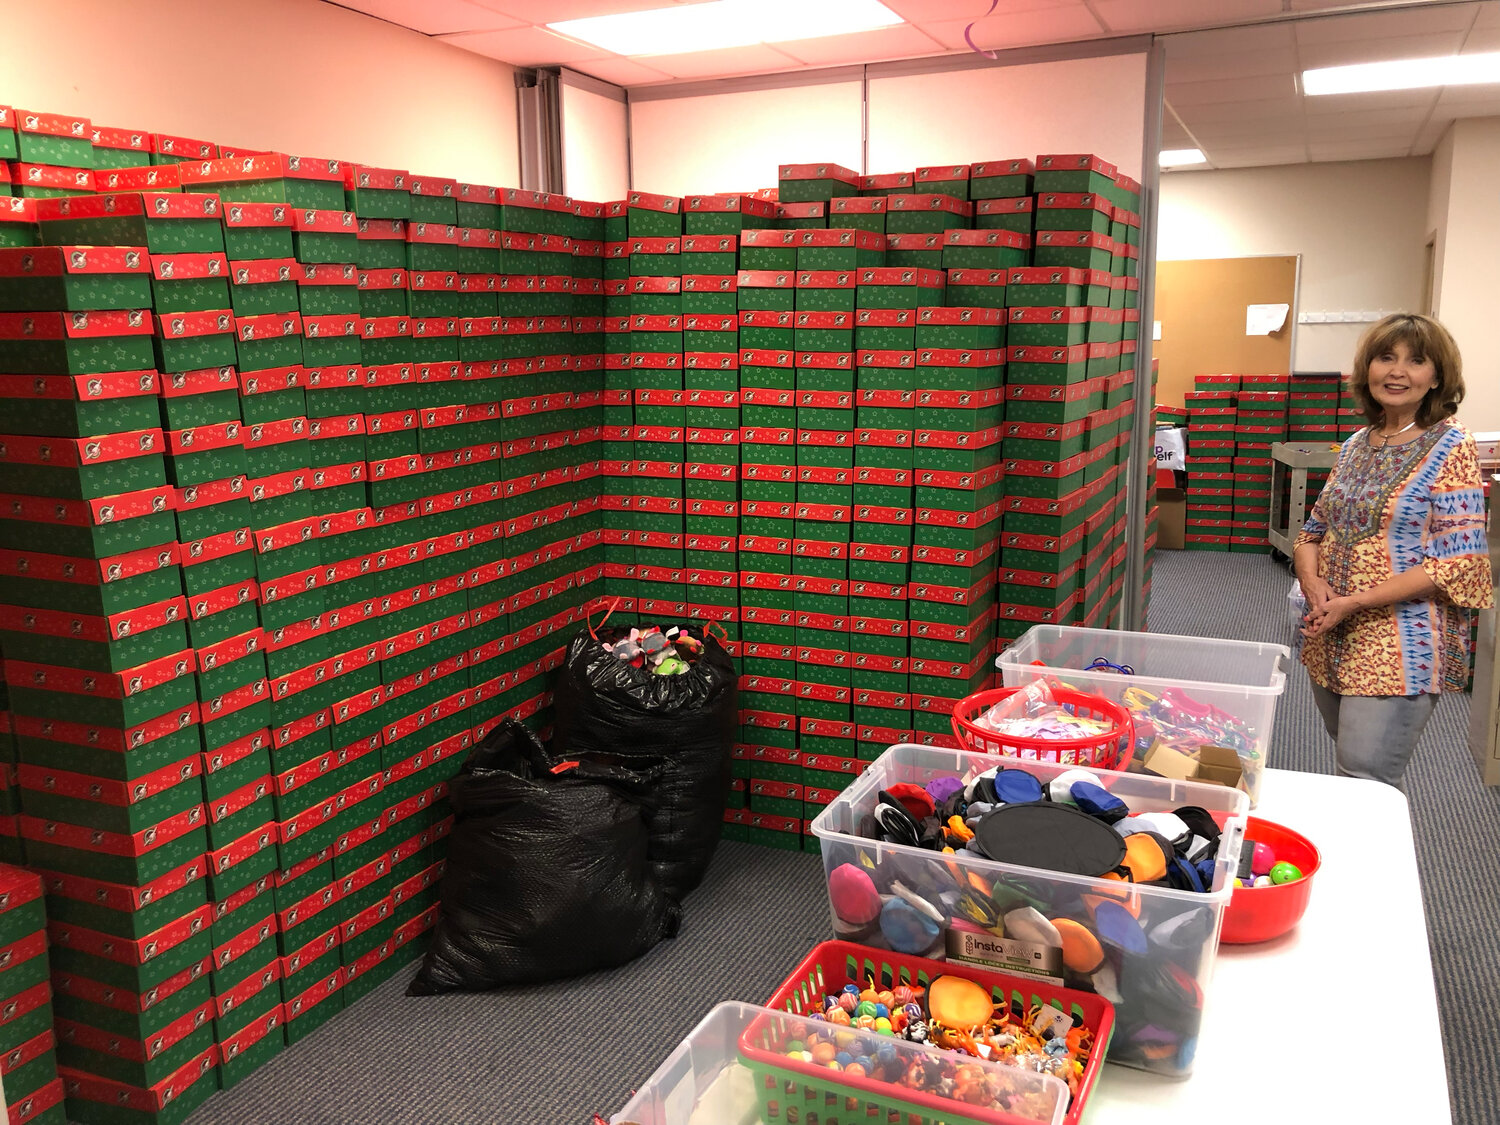 Margaret McMullen spearheaded the drive to send thousands of Christmas boxes to children around the world. (Photo/Macland Baptist Church)